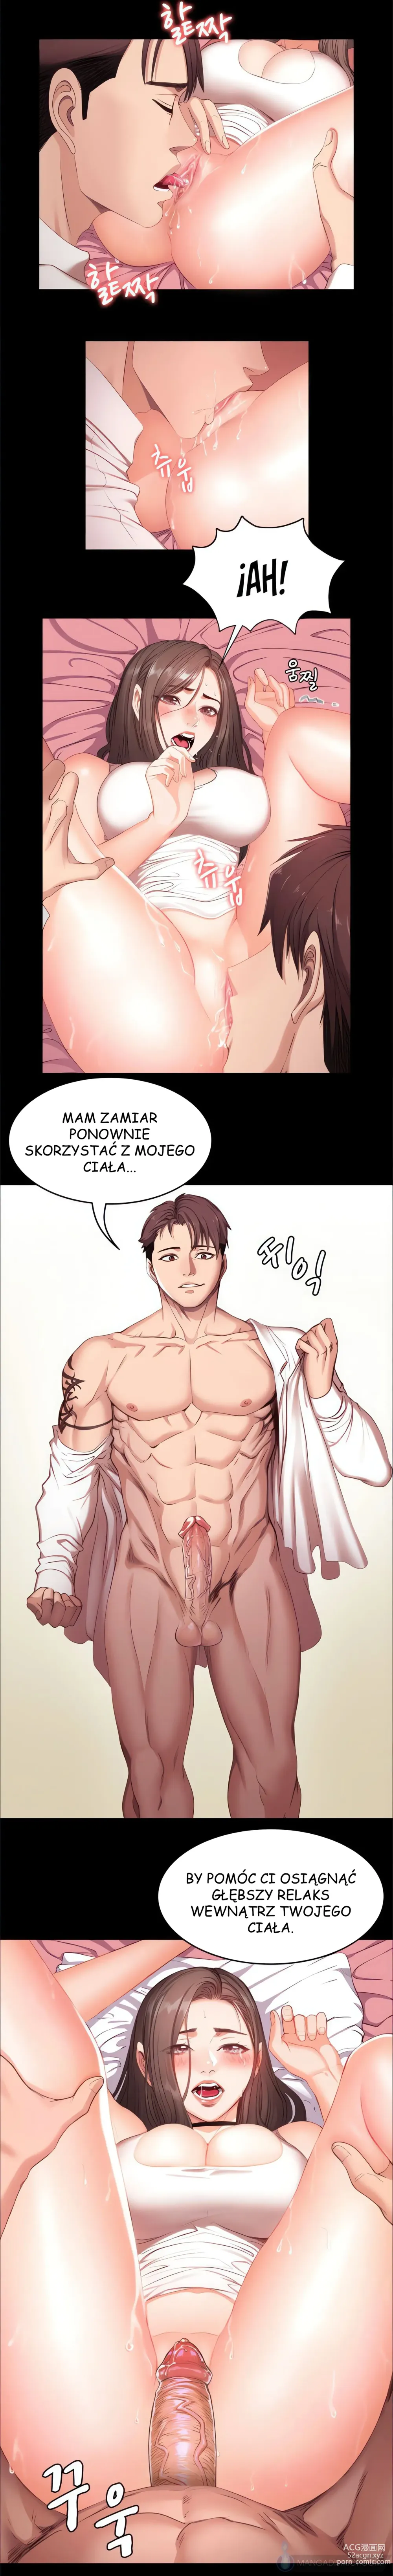 Page 21 of manga FITNESS Ch.1-2 (uncensored)